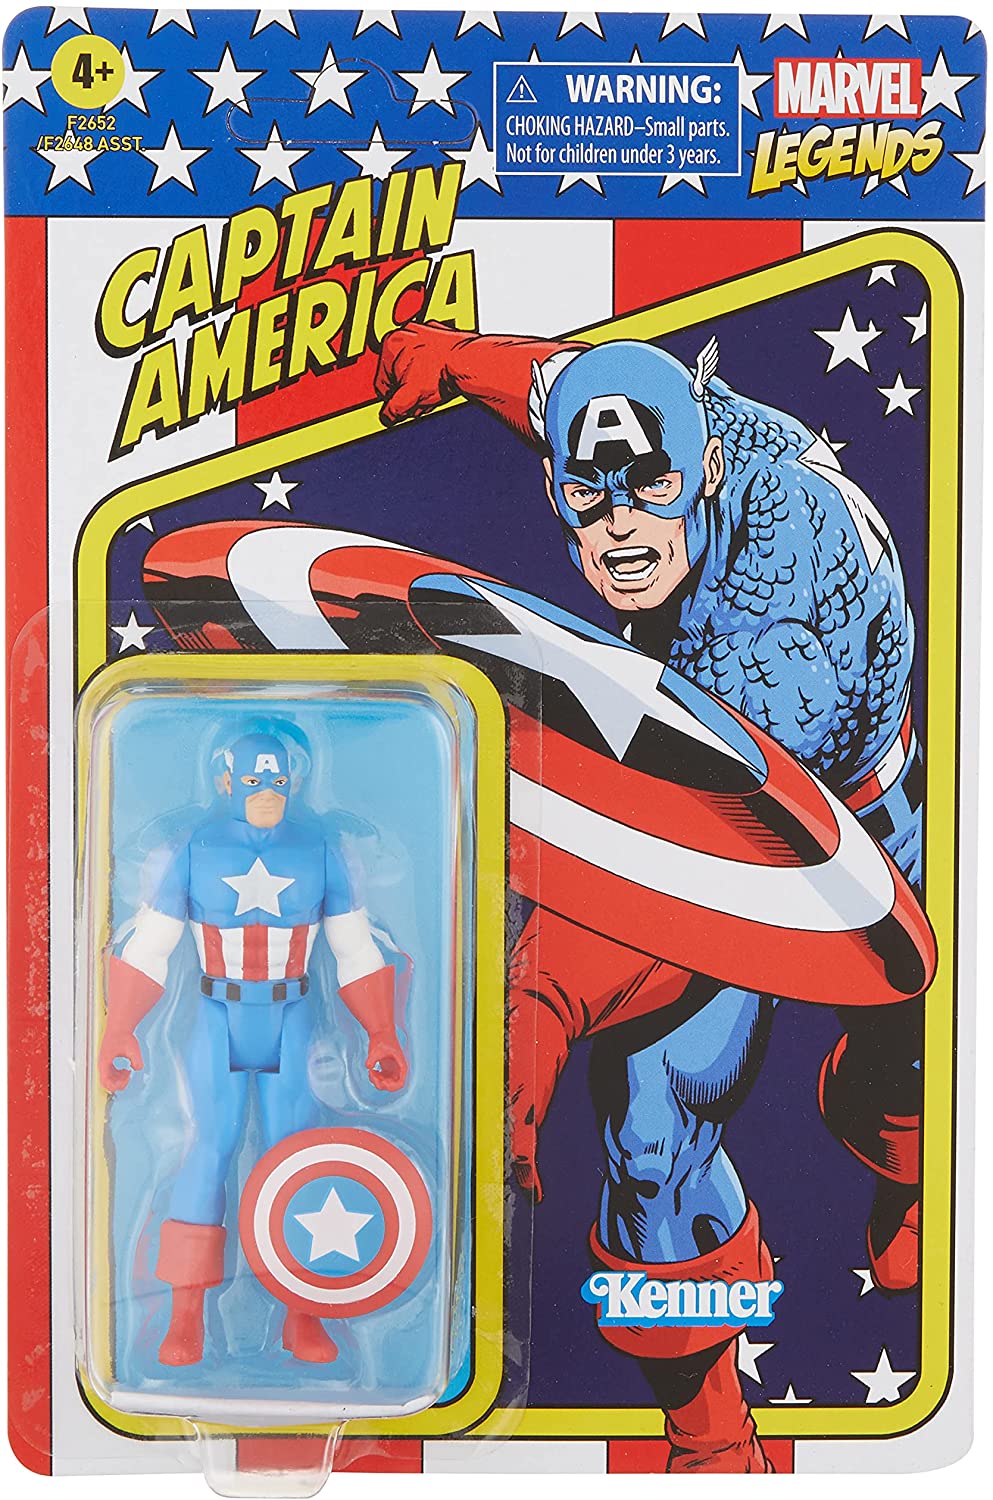 Hasbro Marvel Legends Series 3.75-inch Retro 375 Collection Captain America Action Figure Toy